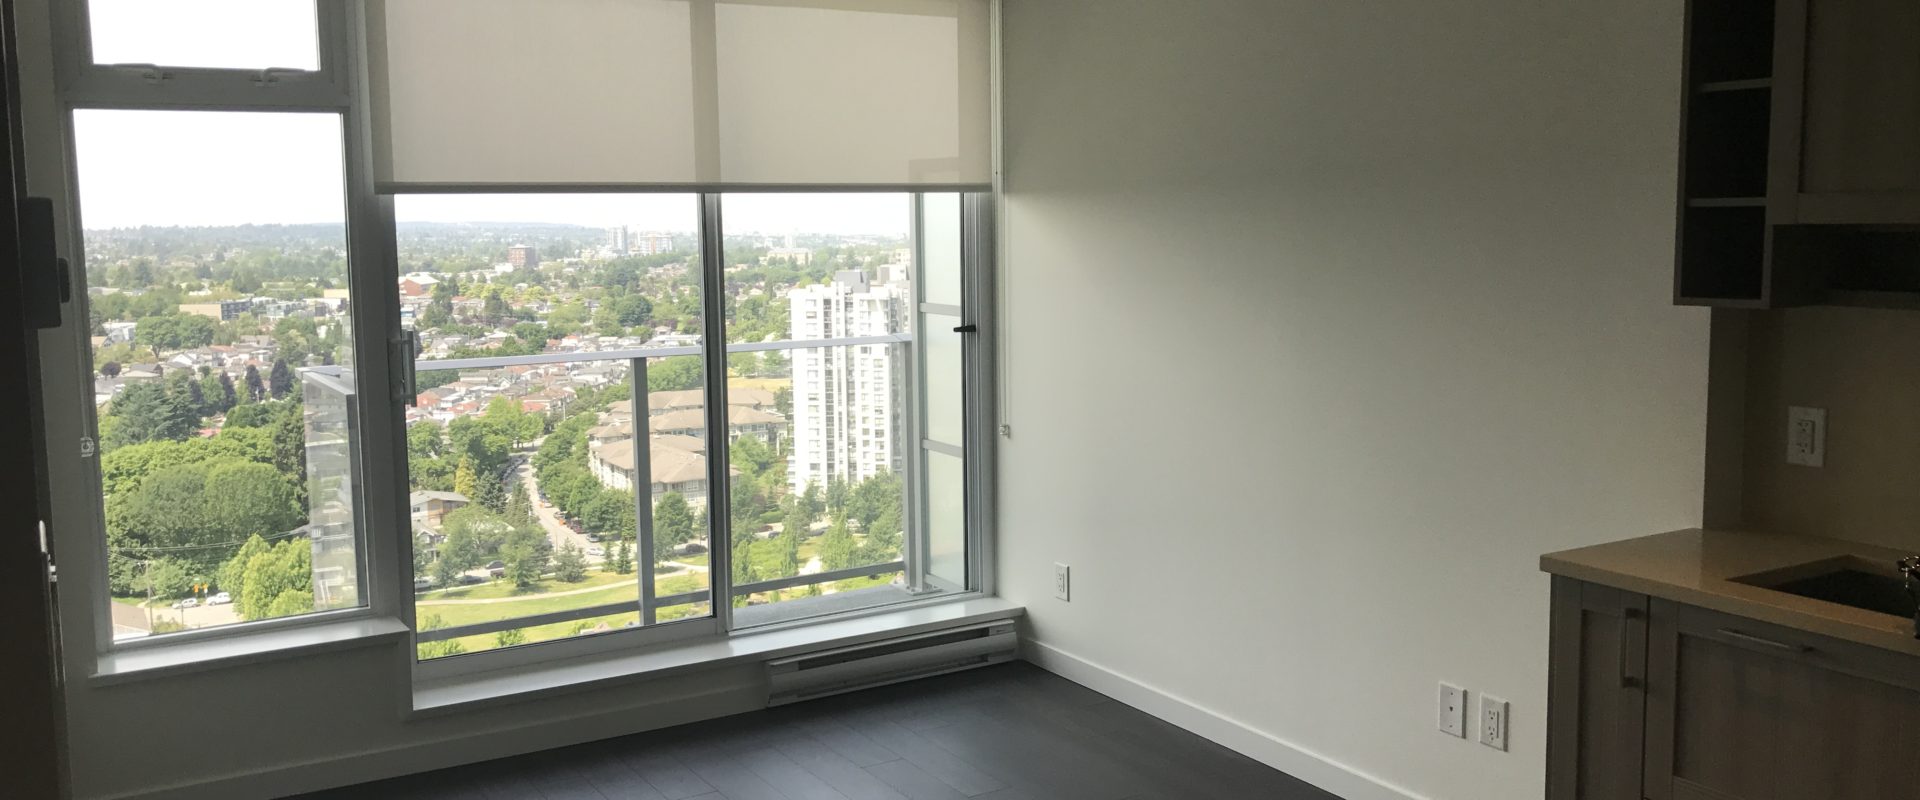 Brand New 1 bdrm+Den High Rise condo with Great views (Vancouver East)